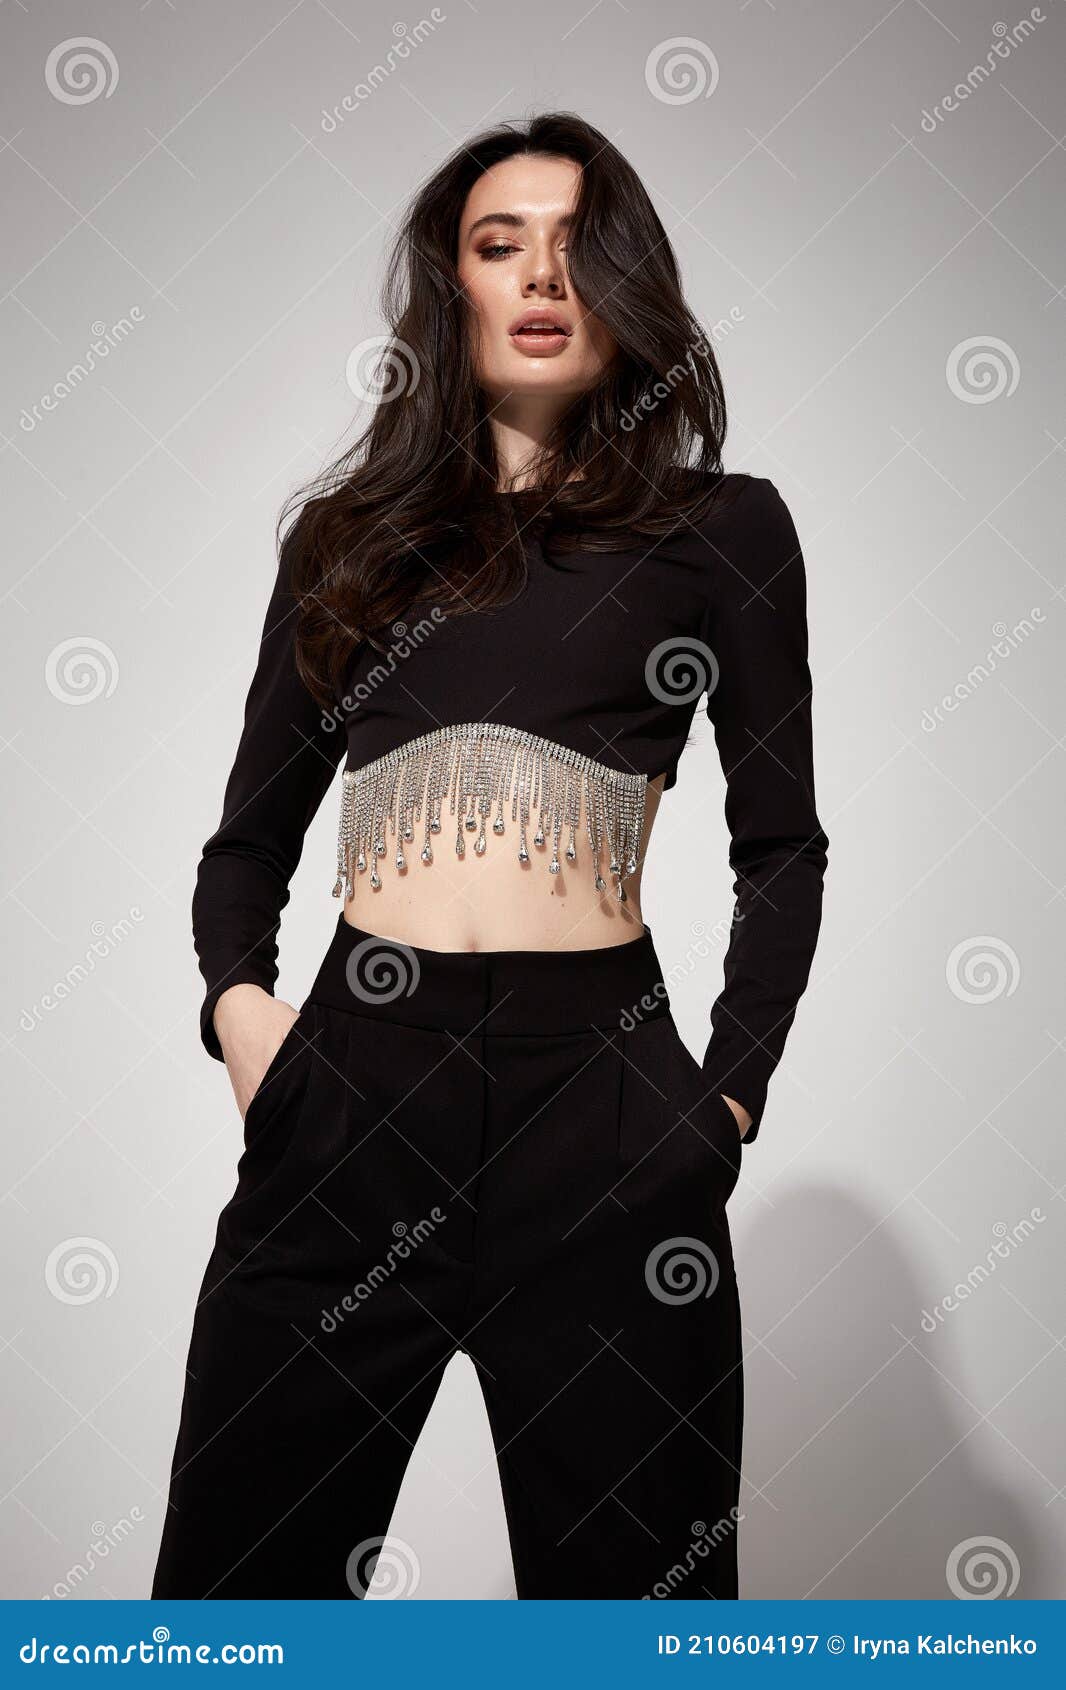 palazzo black outfit  Trendy party outfits Fashion outfits Crop top  fashion